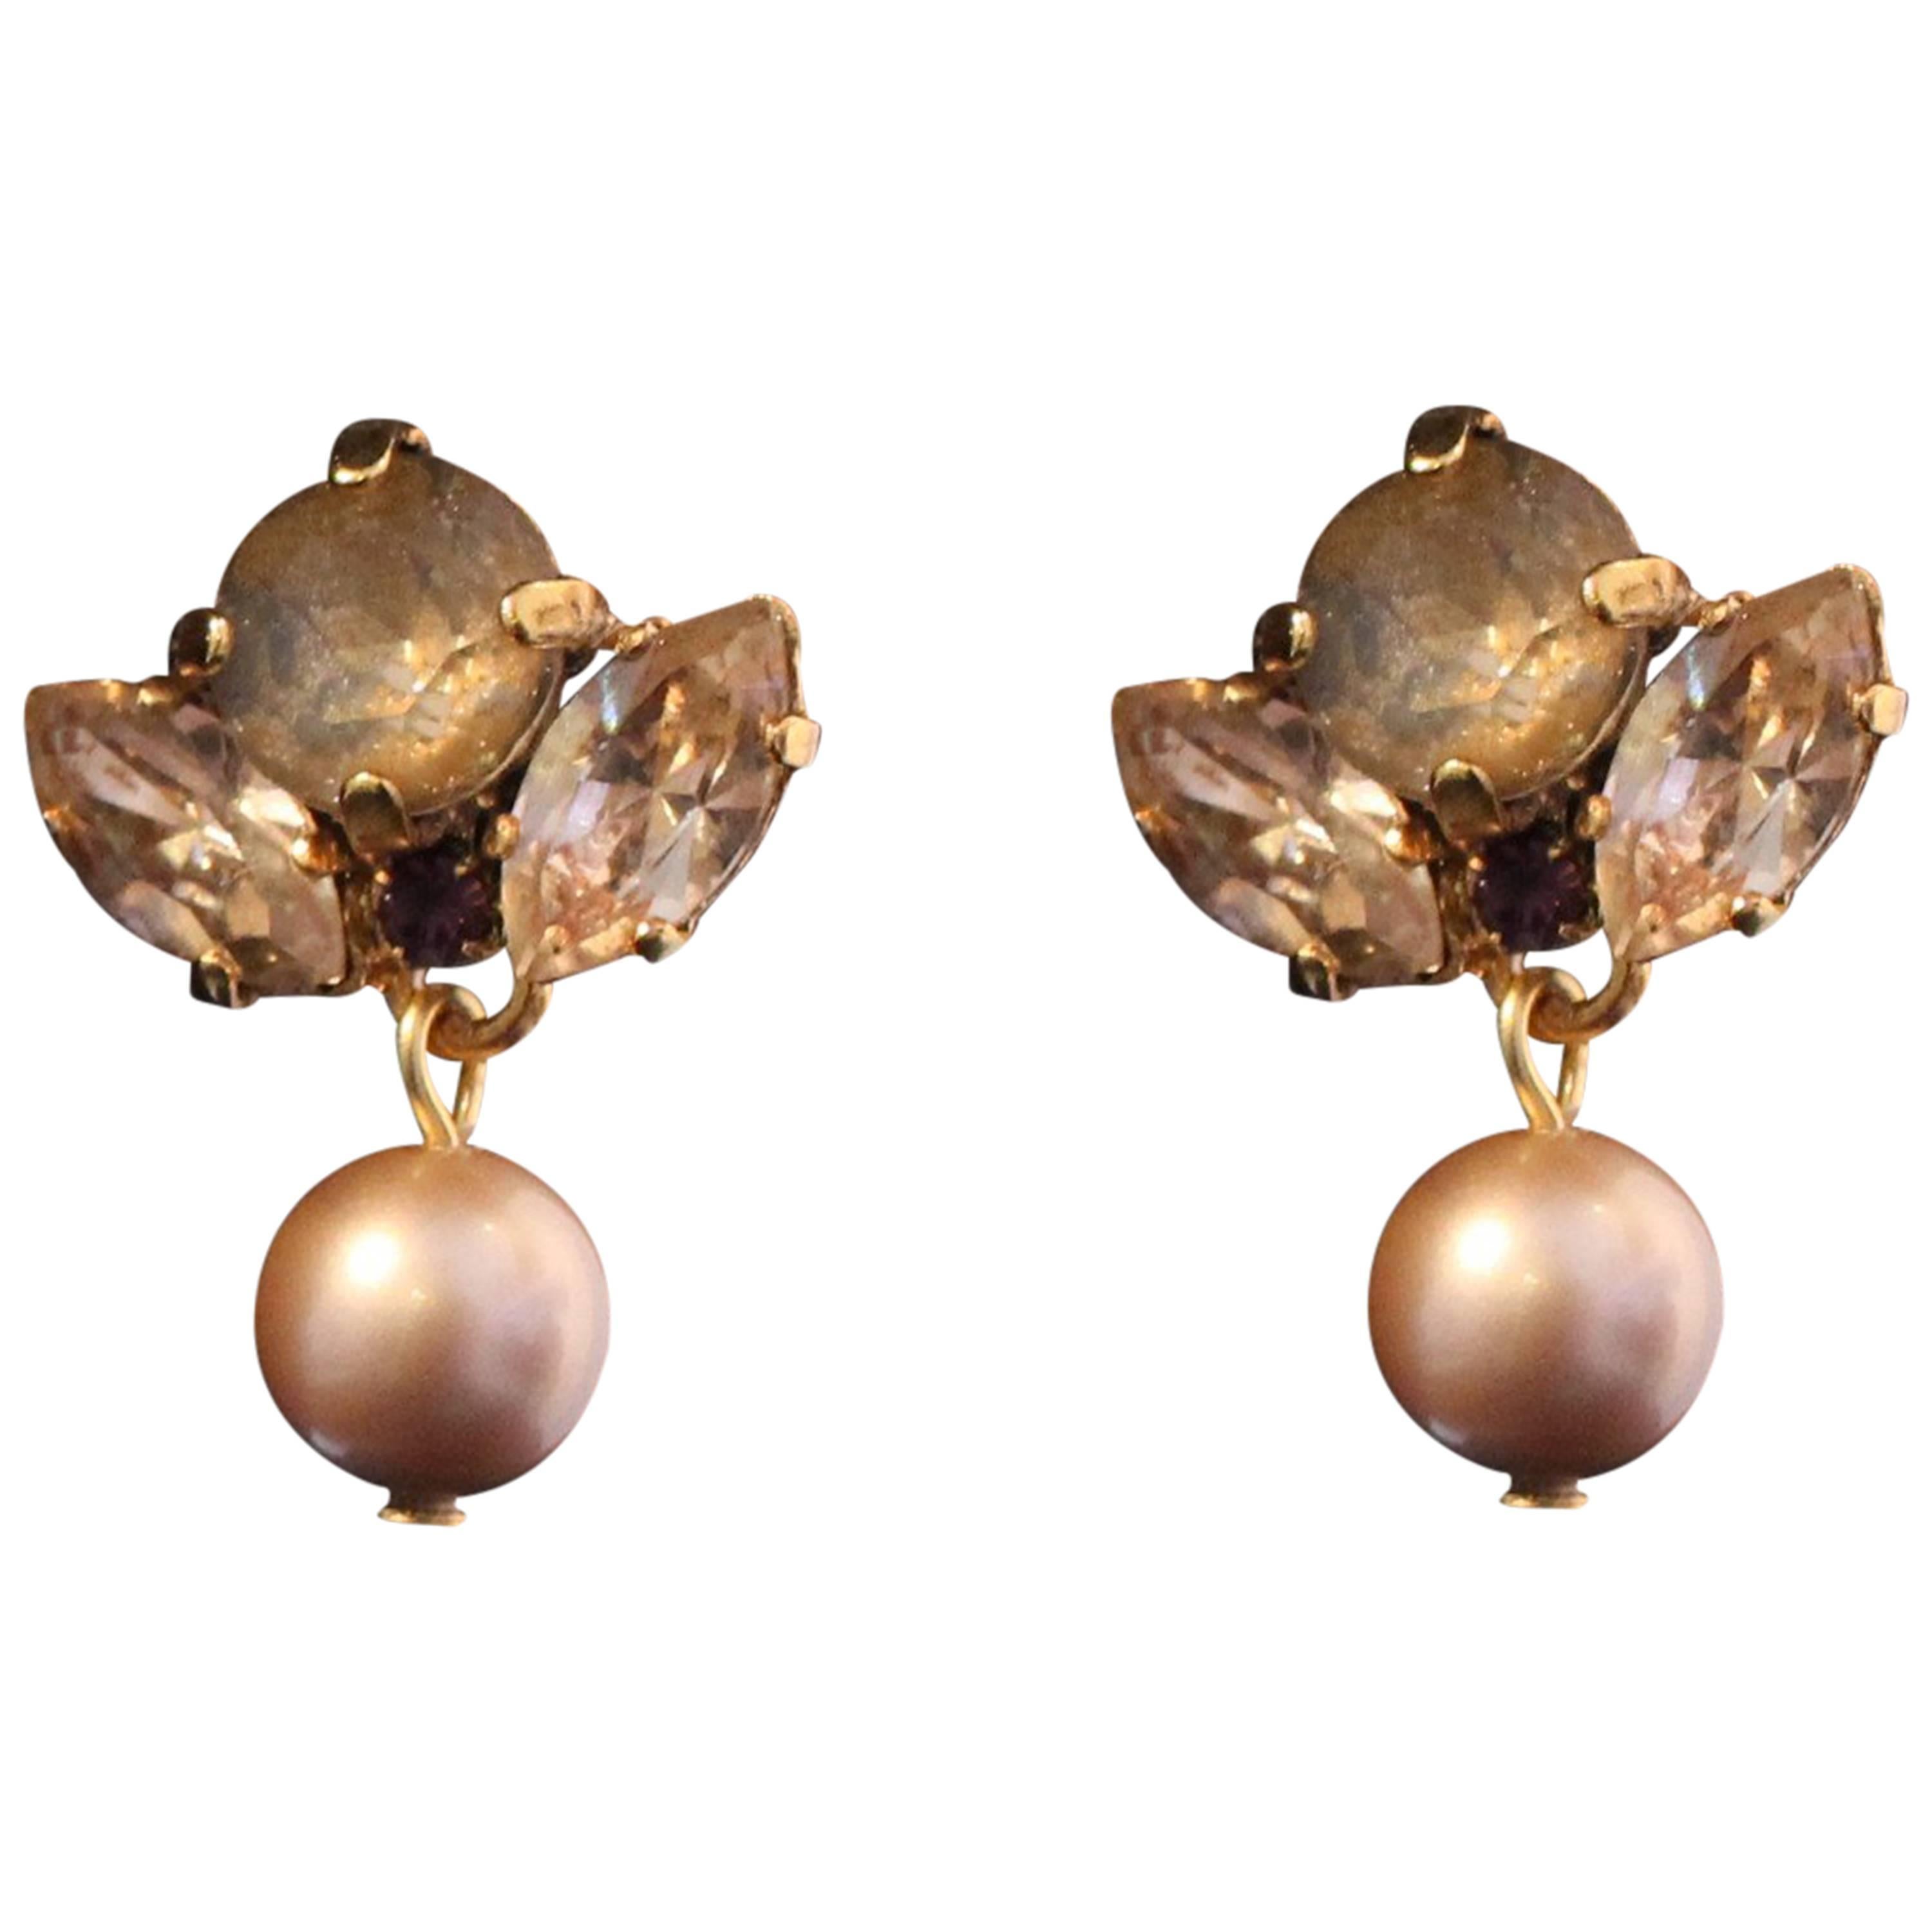 21st Century Modern Small Gold-Plated Swarovski Pearl Earrings by VICKISARGE For Sale